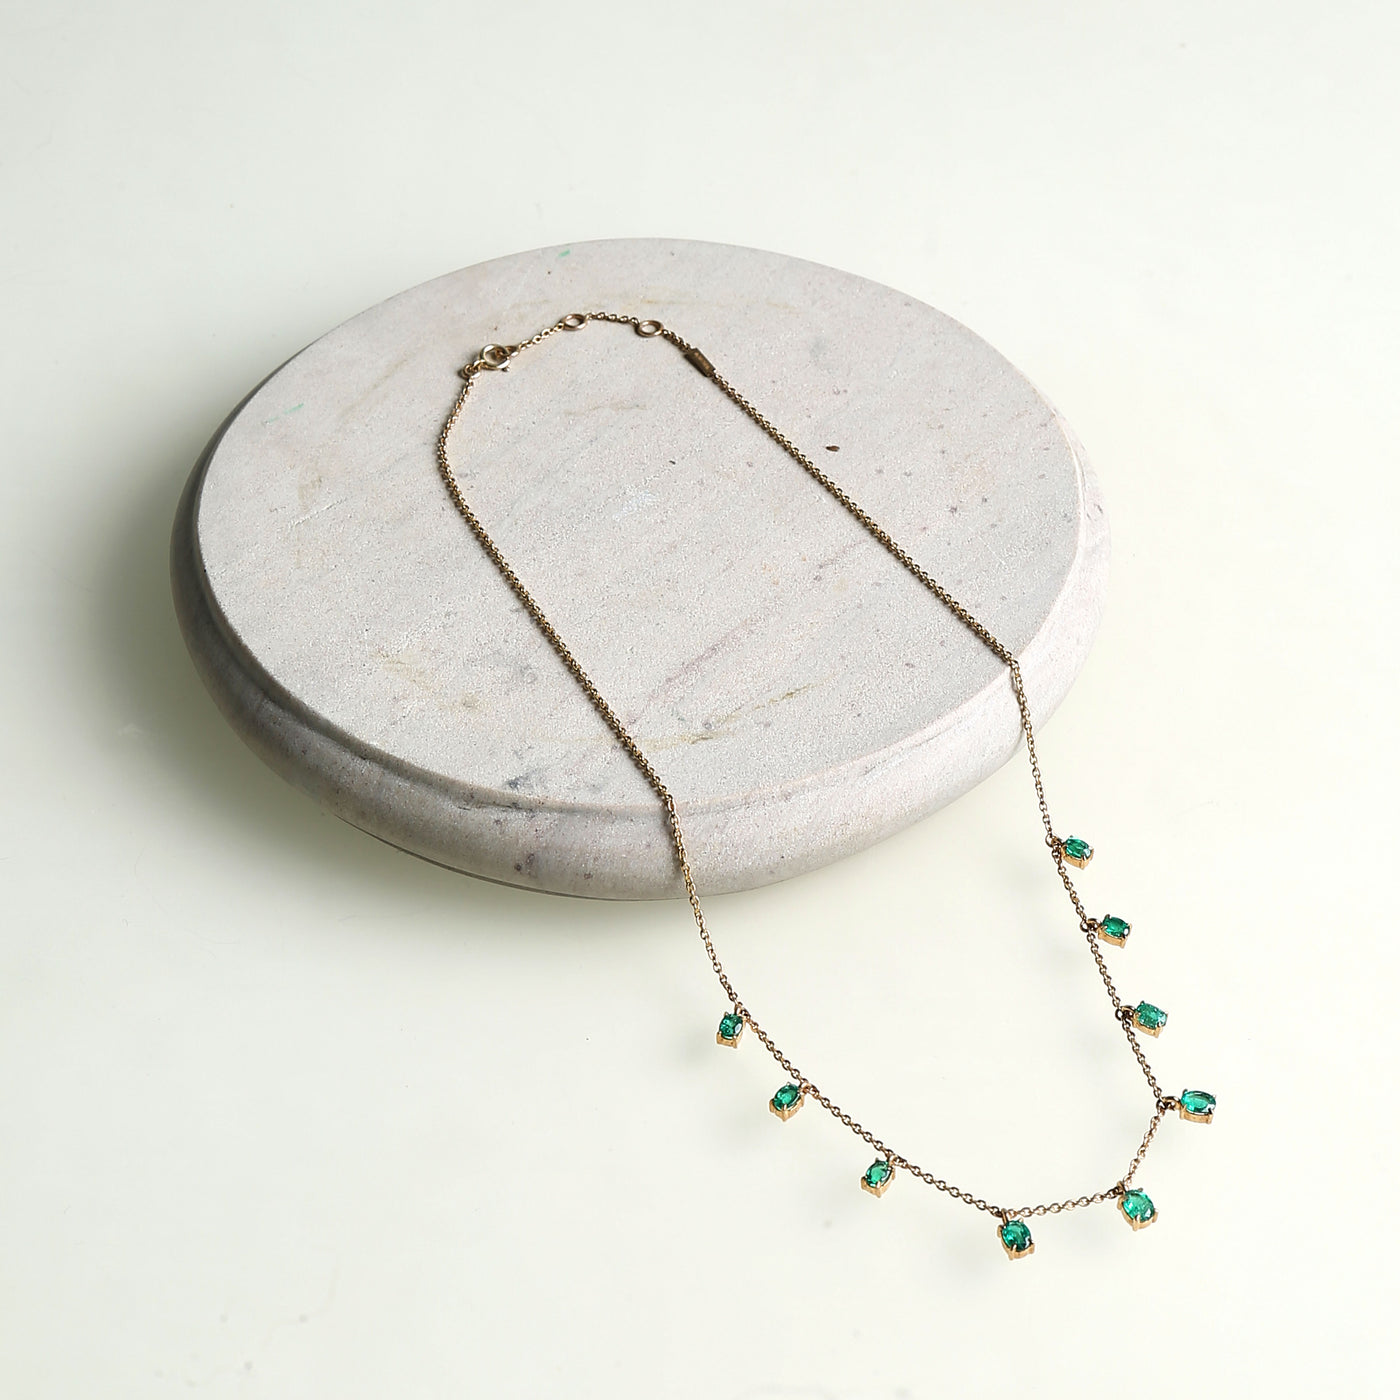 Emerald Fringe Necklace from the Line 